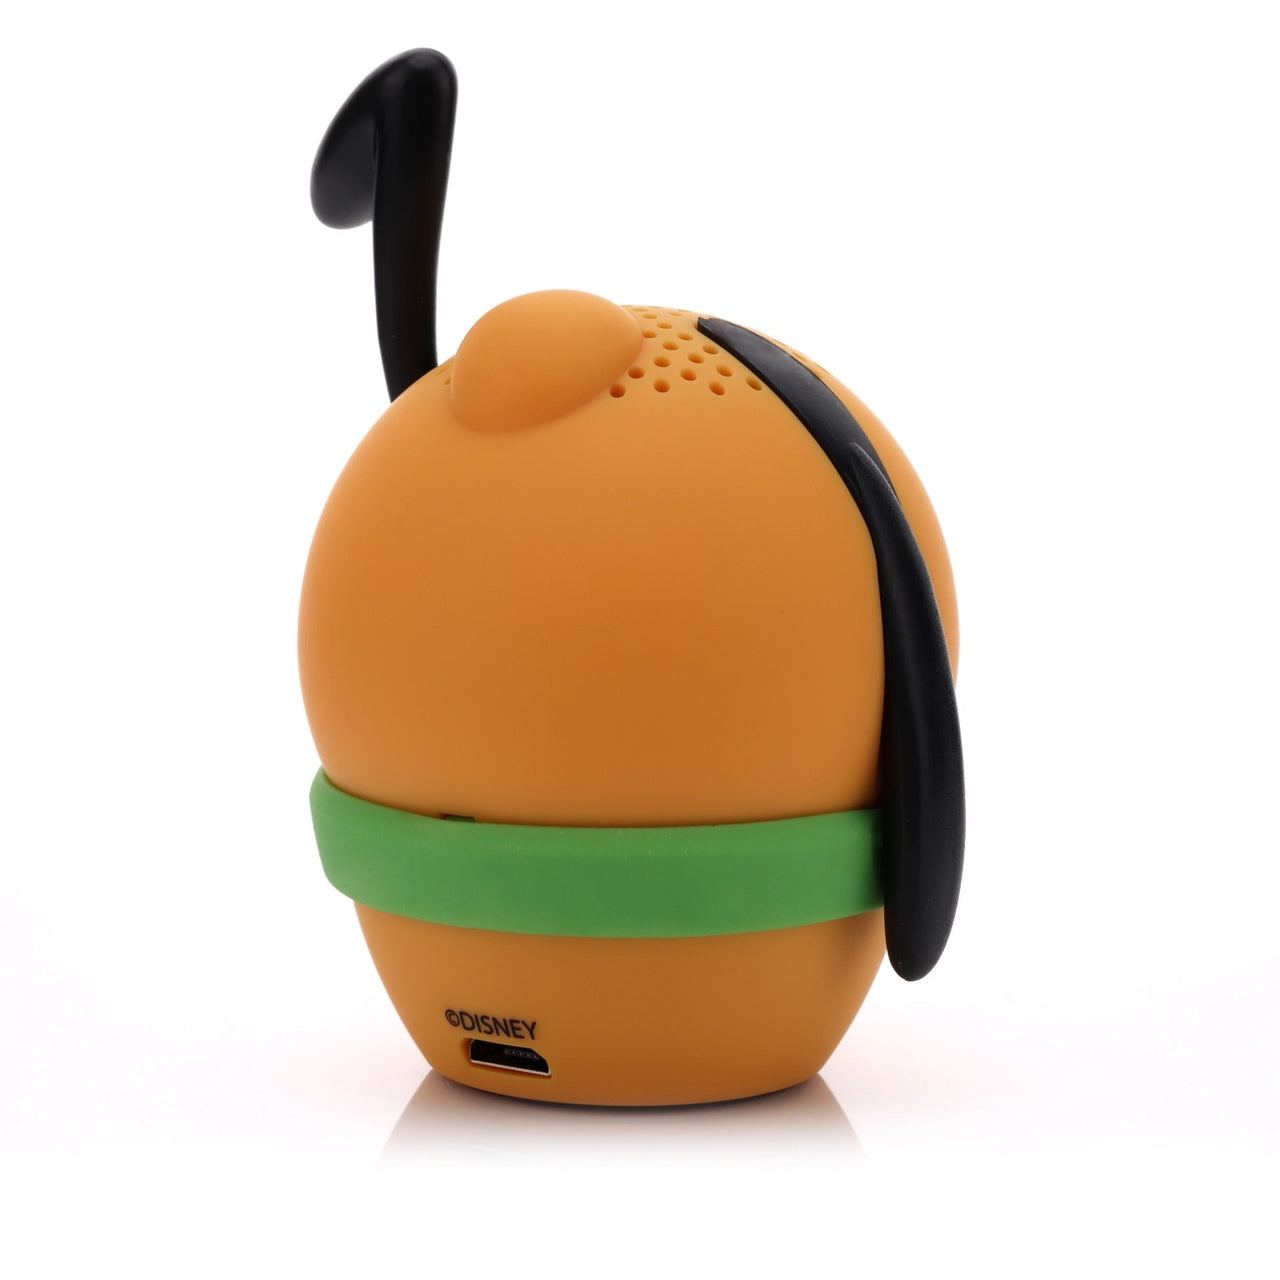 Pluto - Bitty Boomers Collectable Bluetooth Speaker